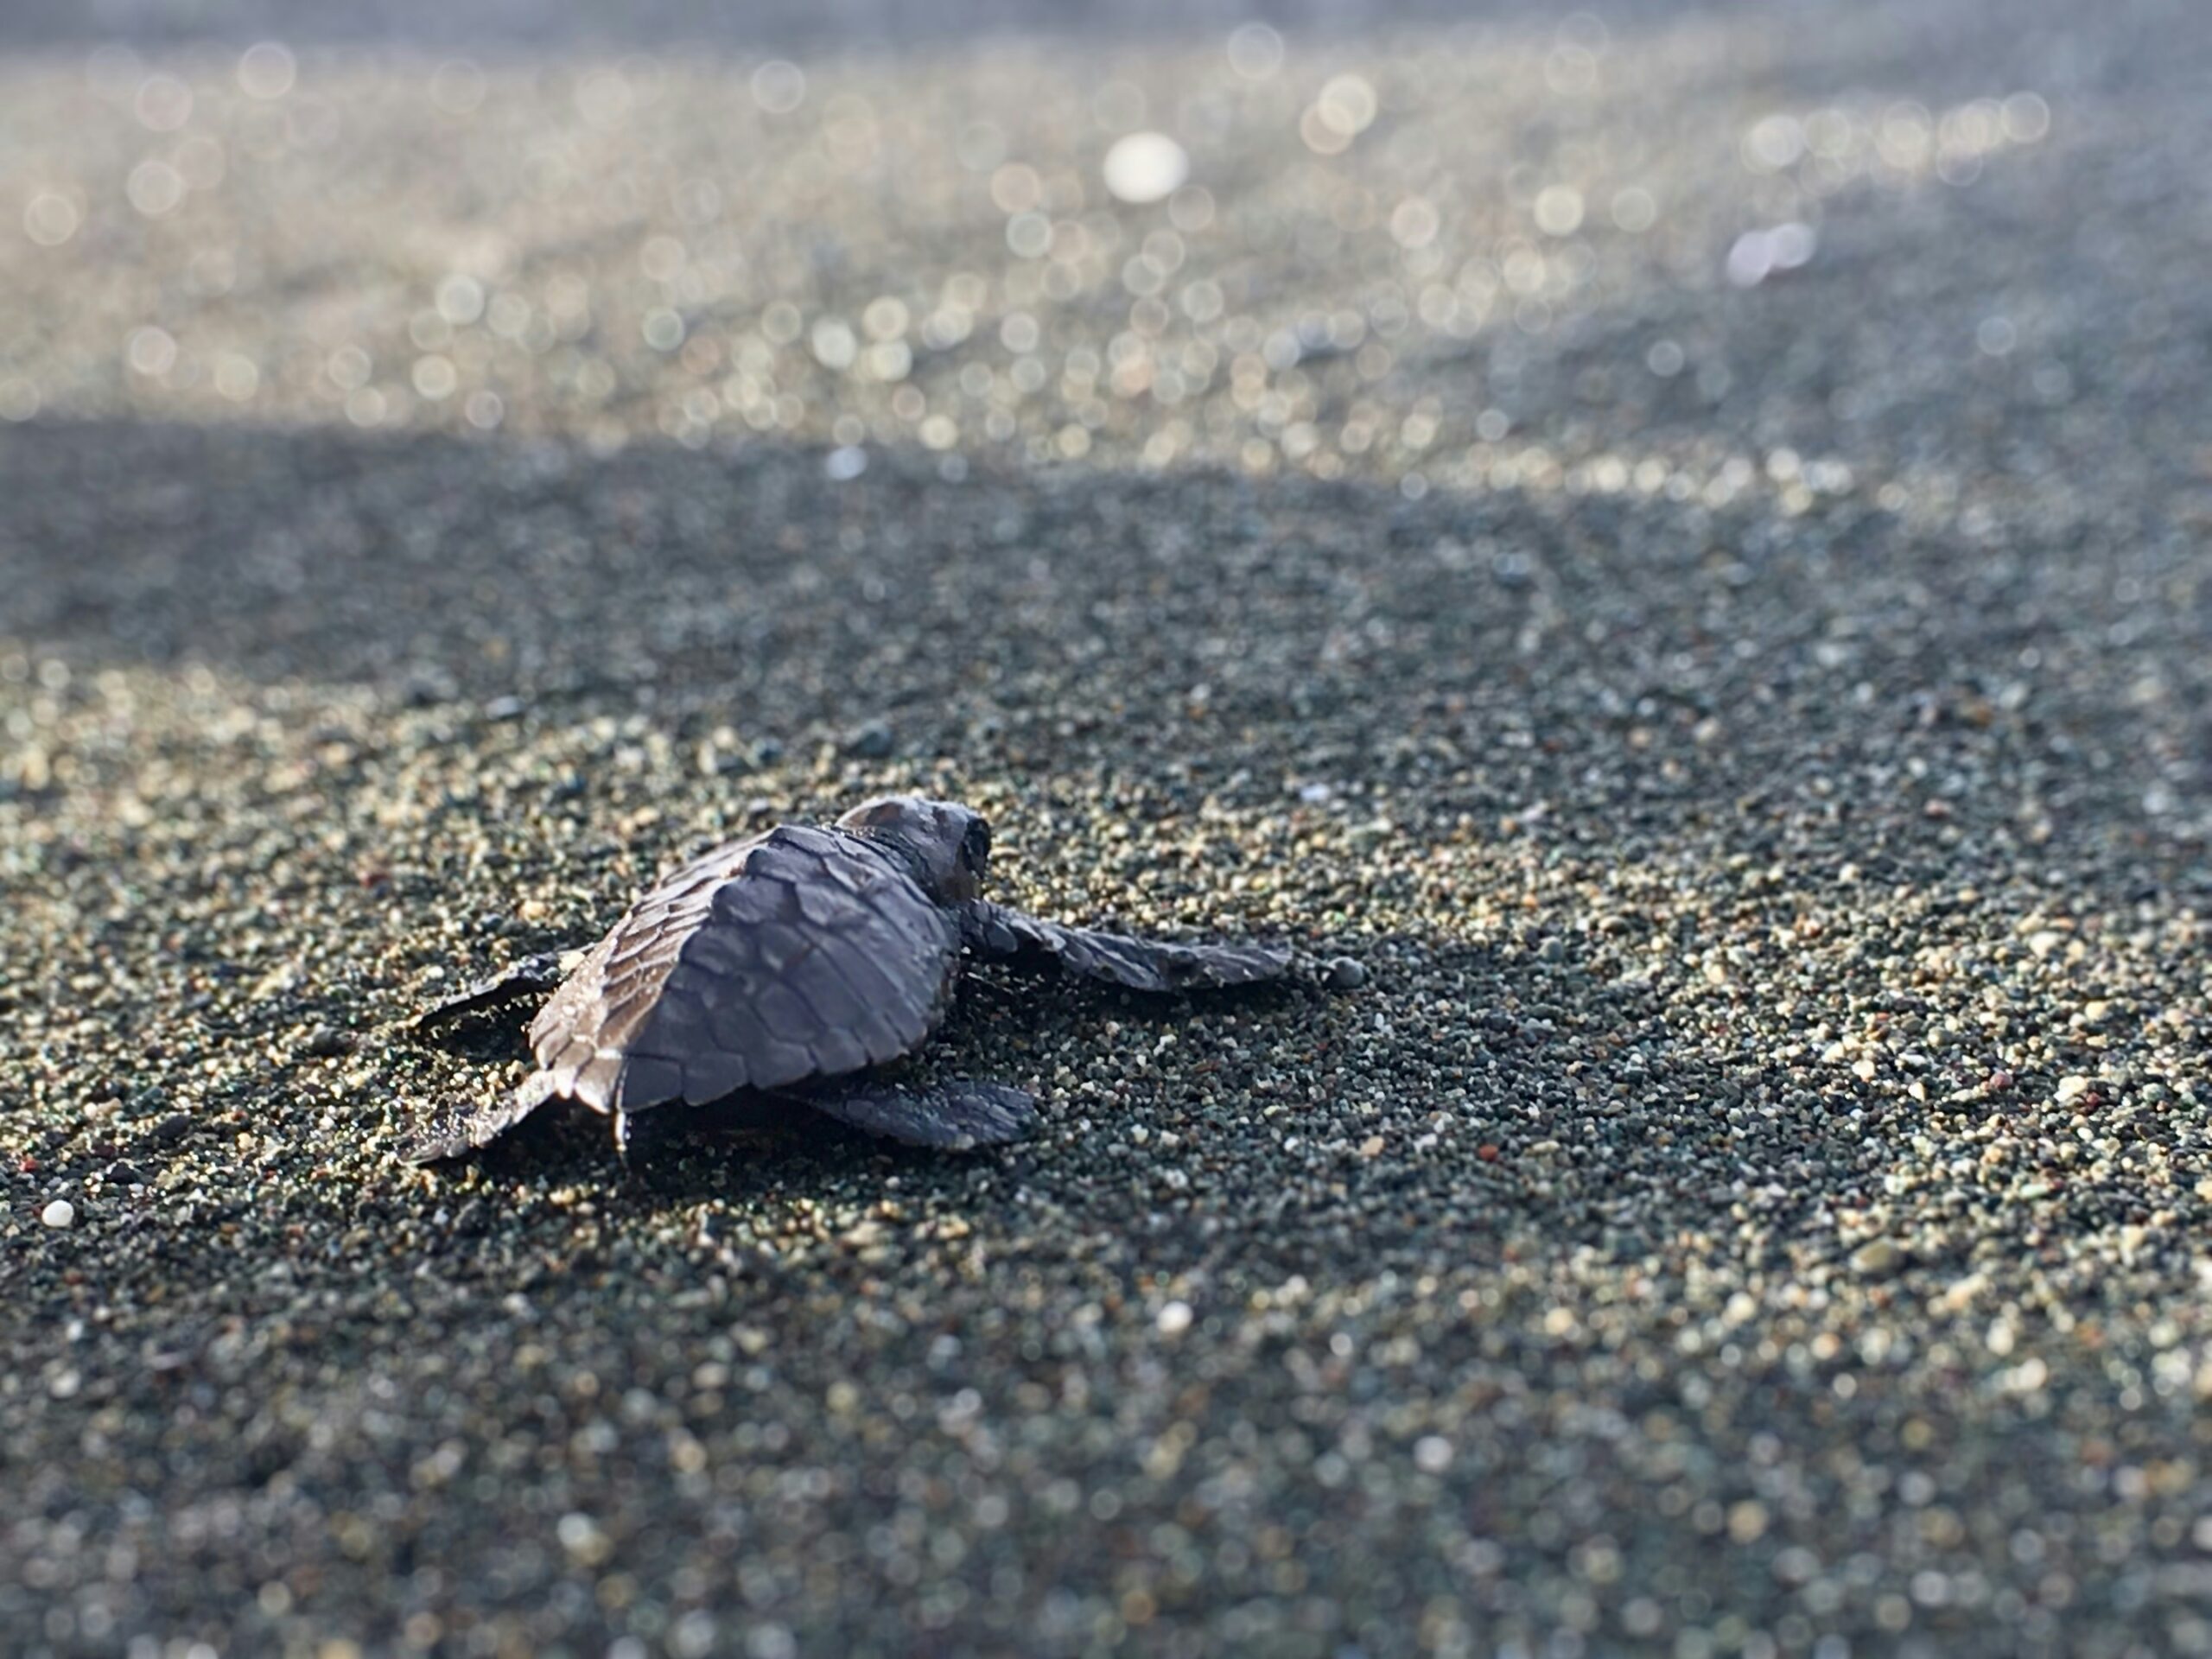 The wildlife of Costa Rica is a popular reason visitors go the country. Especially since the country is so diverse.
pictured: a recently hatched turtle on black sand